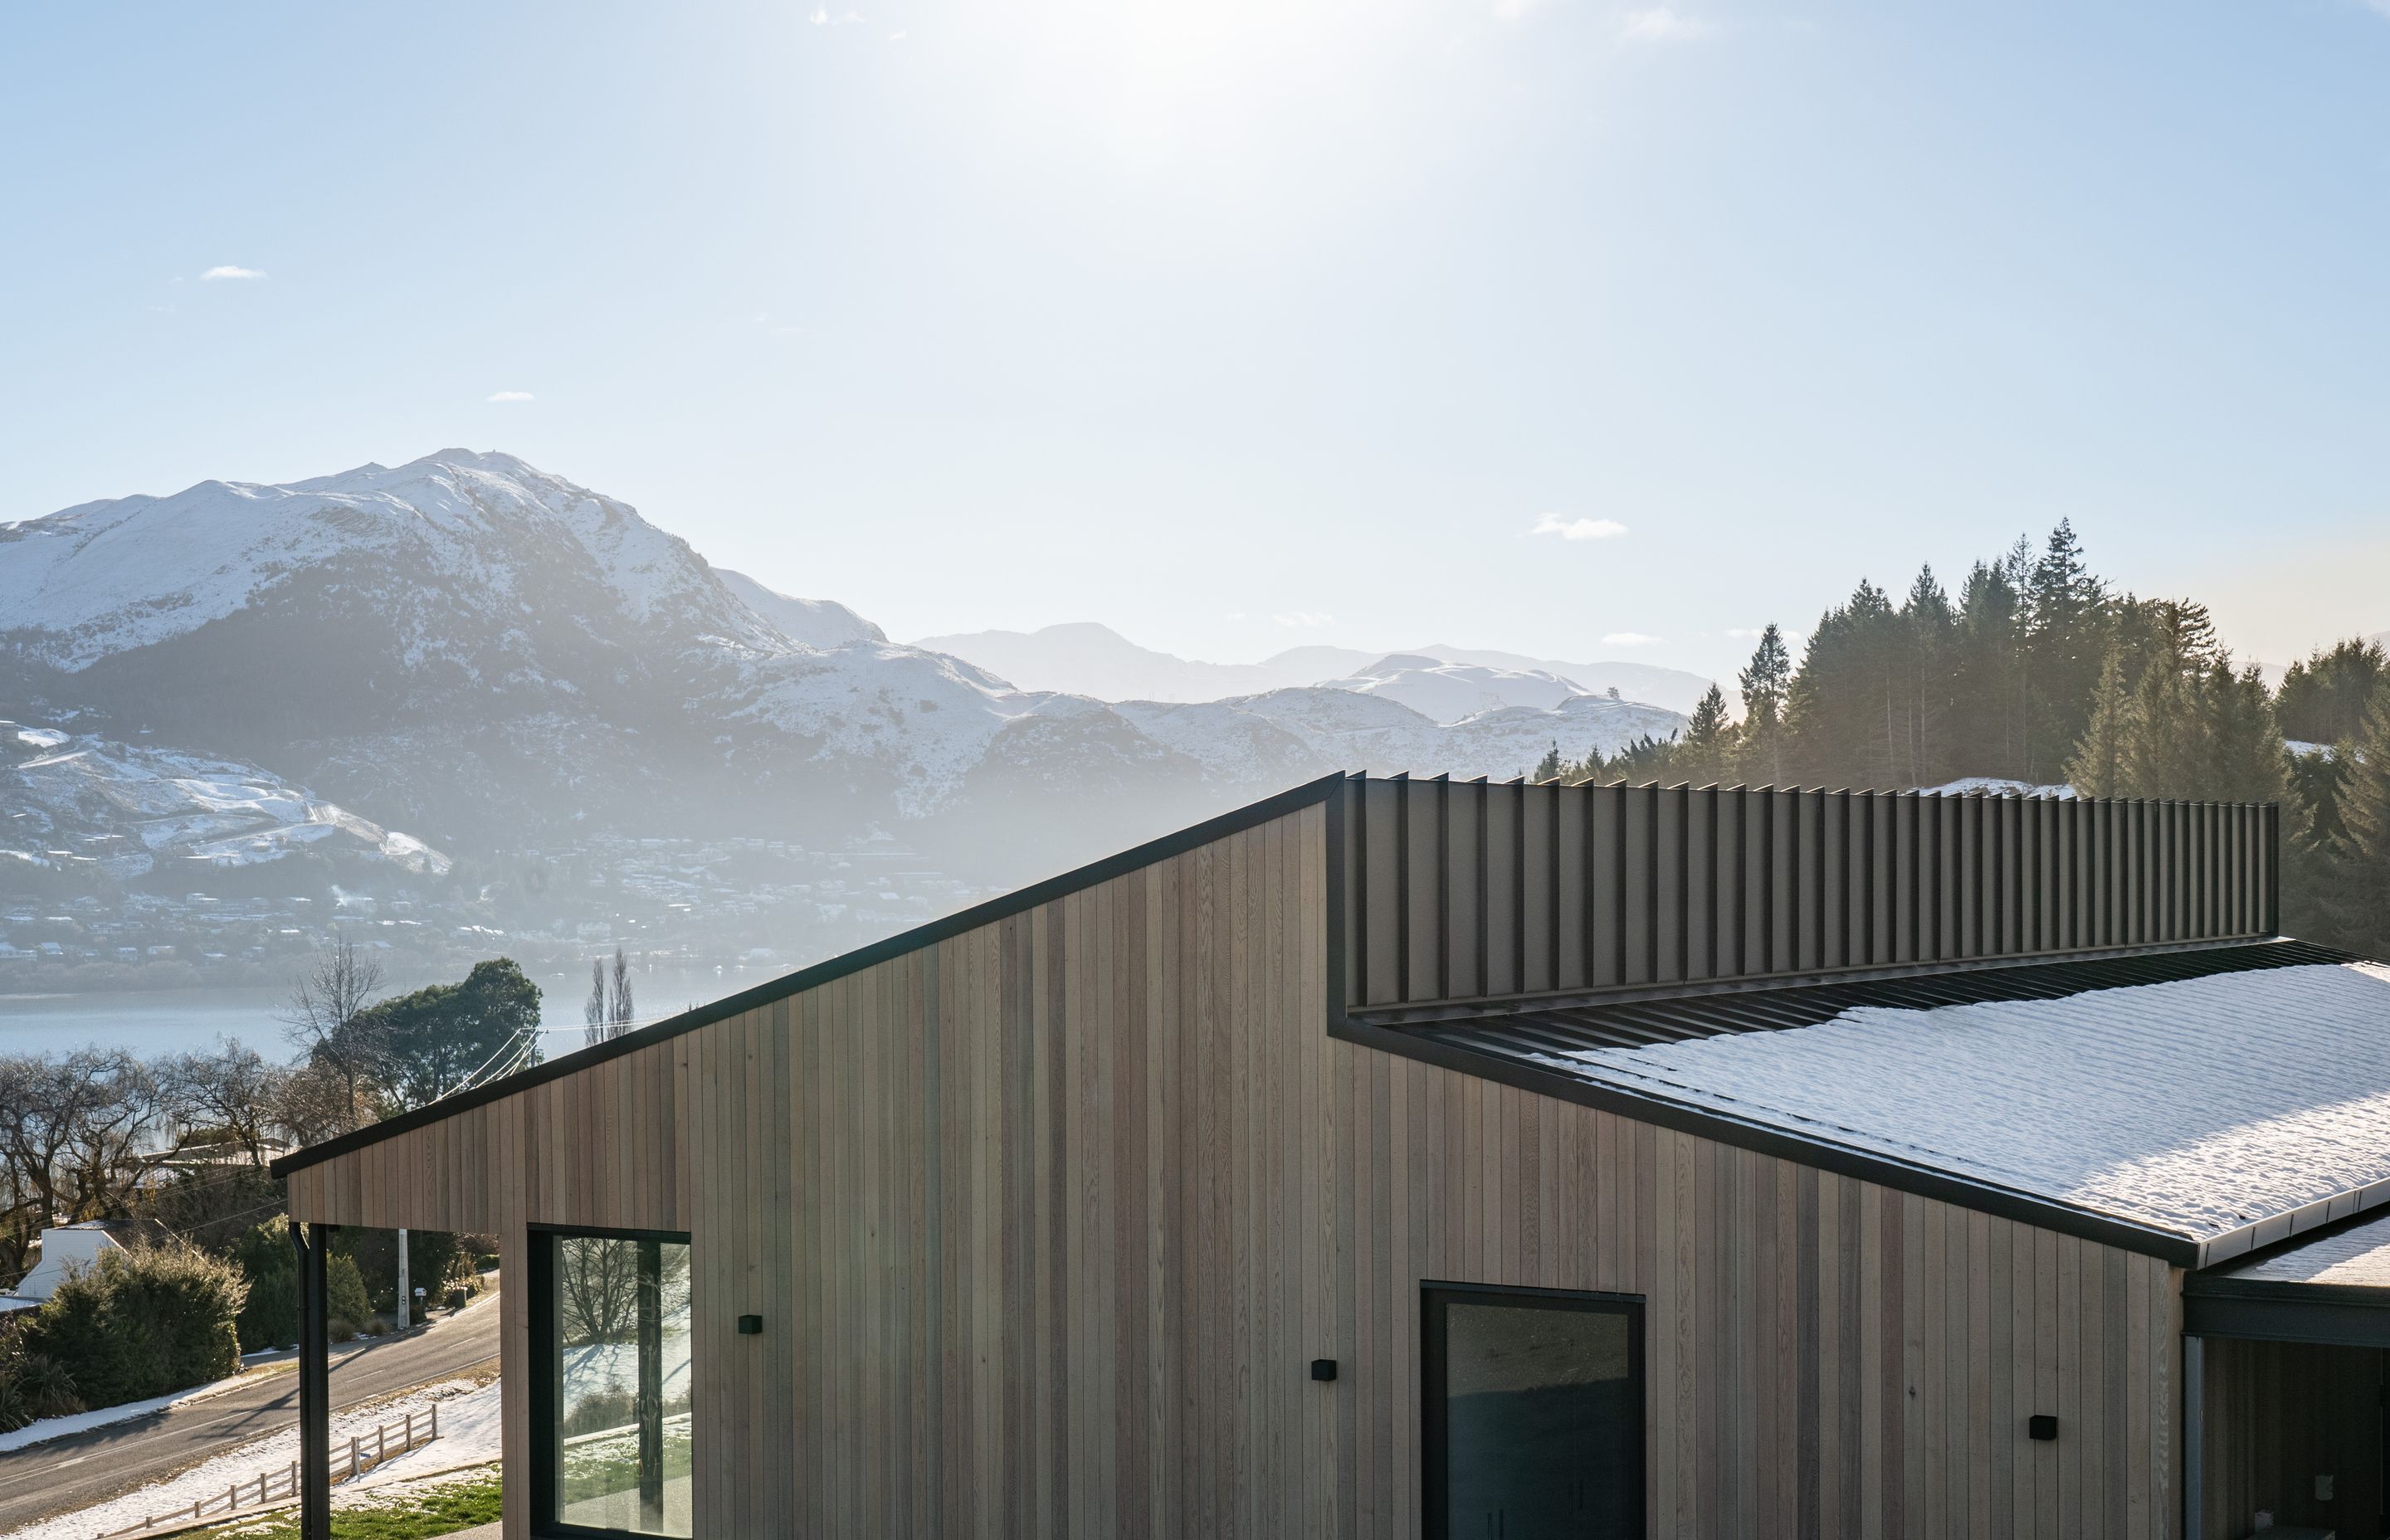 The clean, folded geometry of the roofline informs a hierarchy of spaces within and also extends beyond the building envelope to create porch enclosures that frame various views of the lake and mountains.